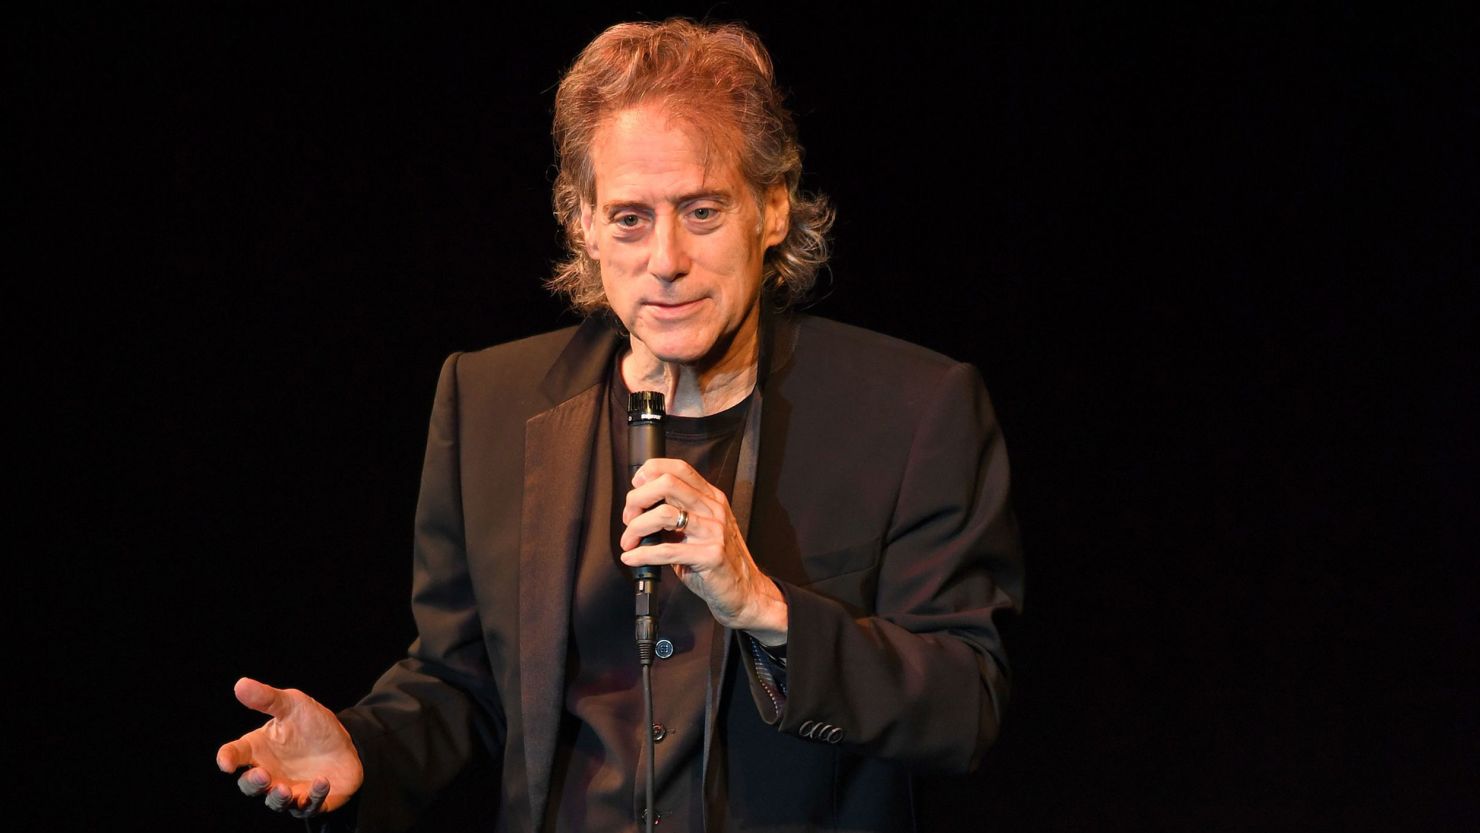 Richard Lewis’ Wife Expresses Gratitude For Support Following His Passing